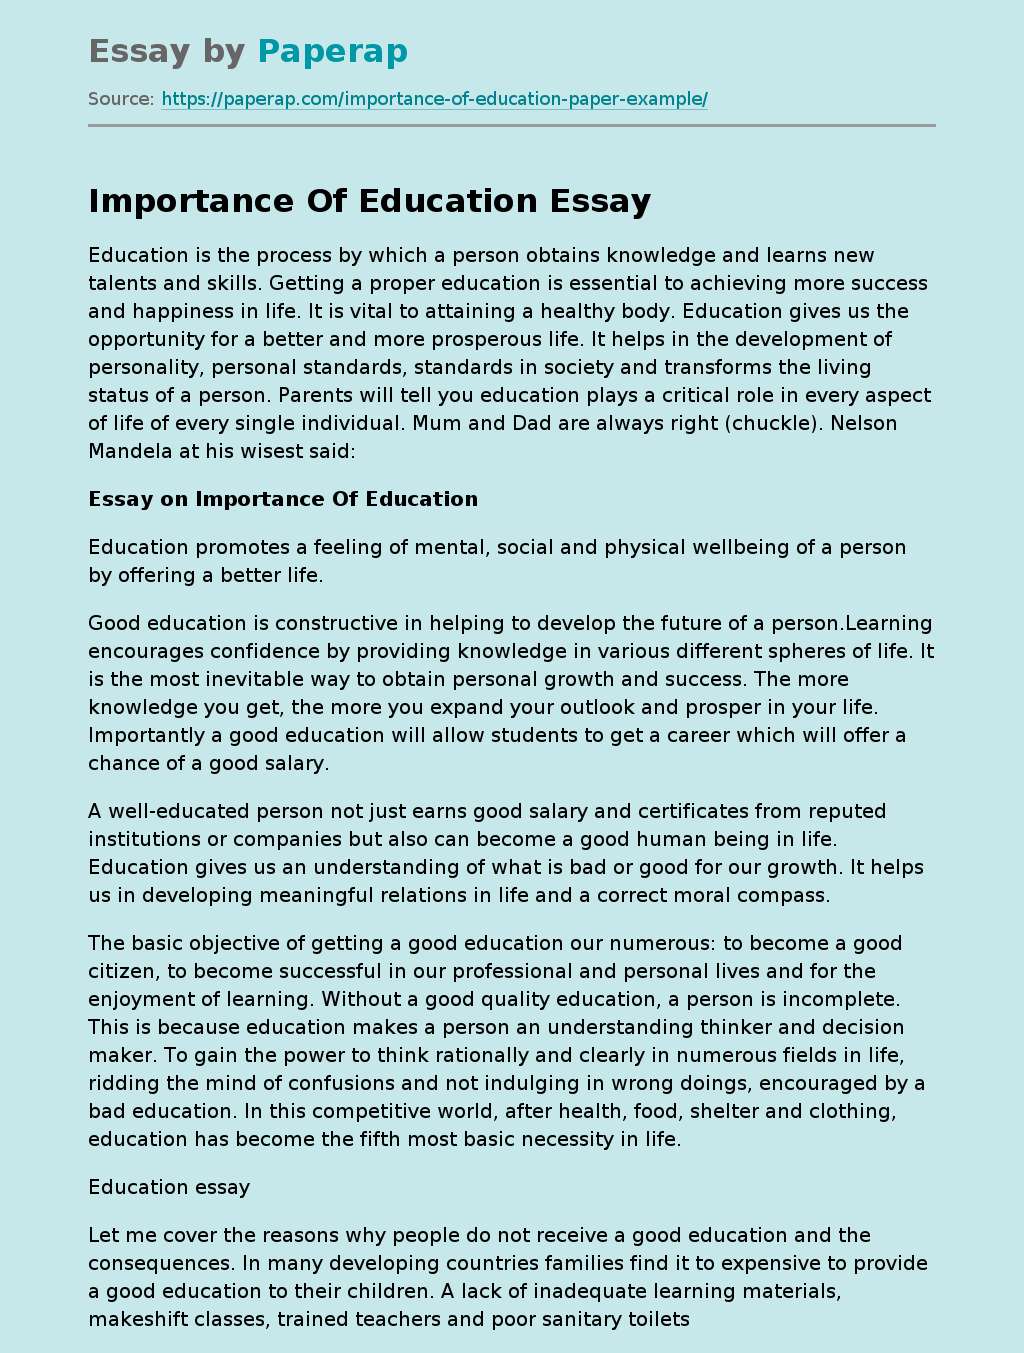 the important education essay